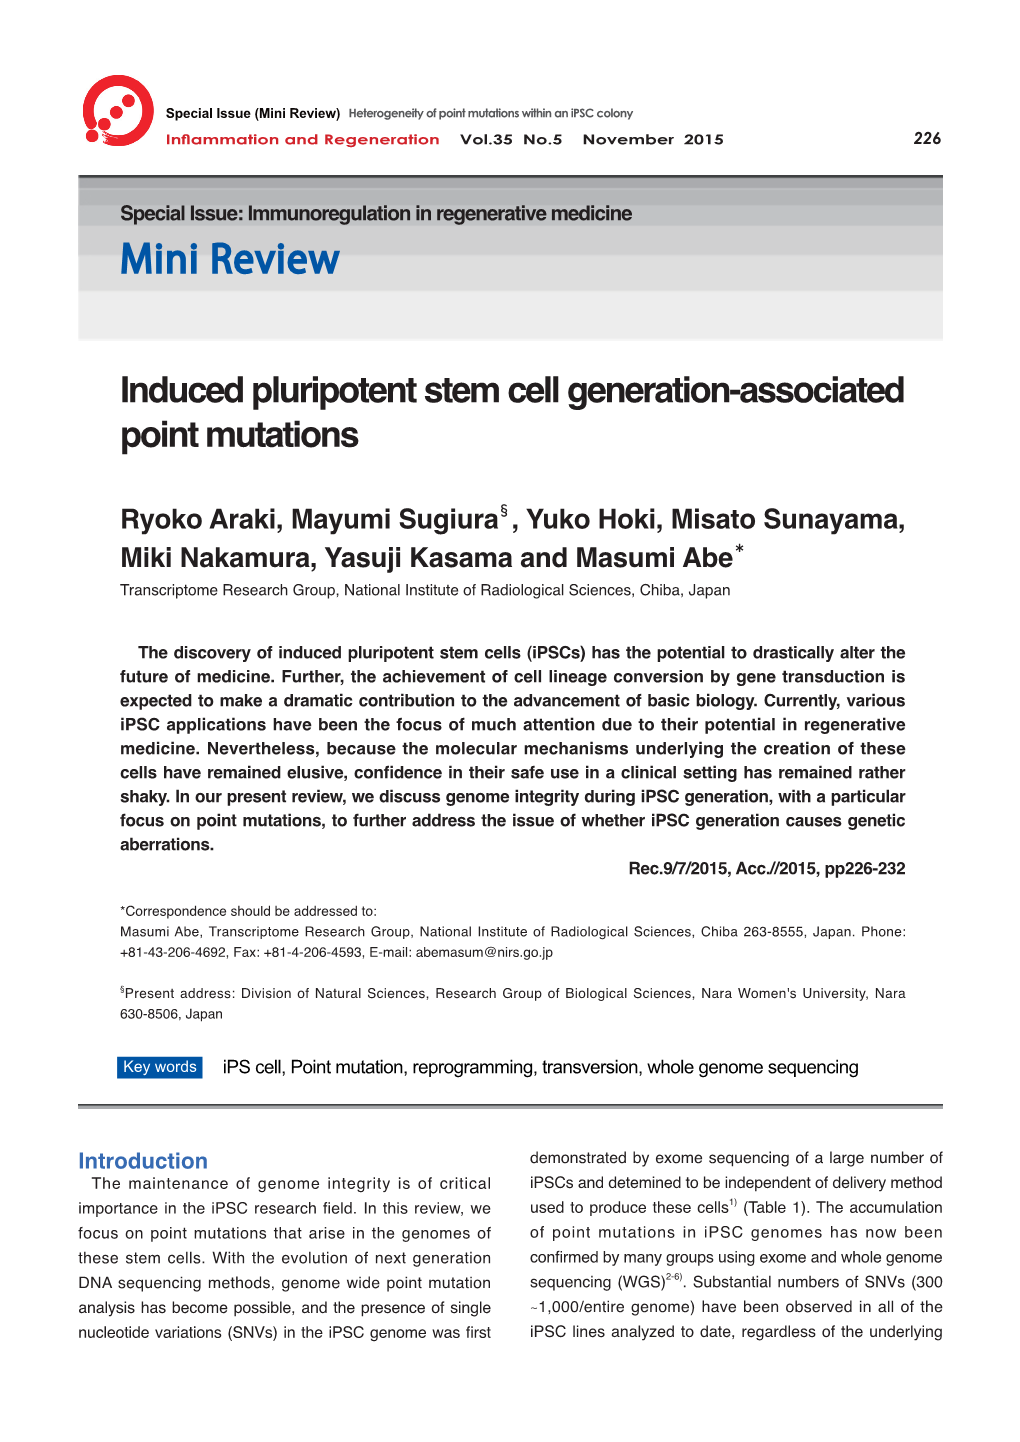 Induced Pluripotent Stem Cell Generation-Associated Point Mutations